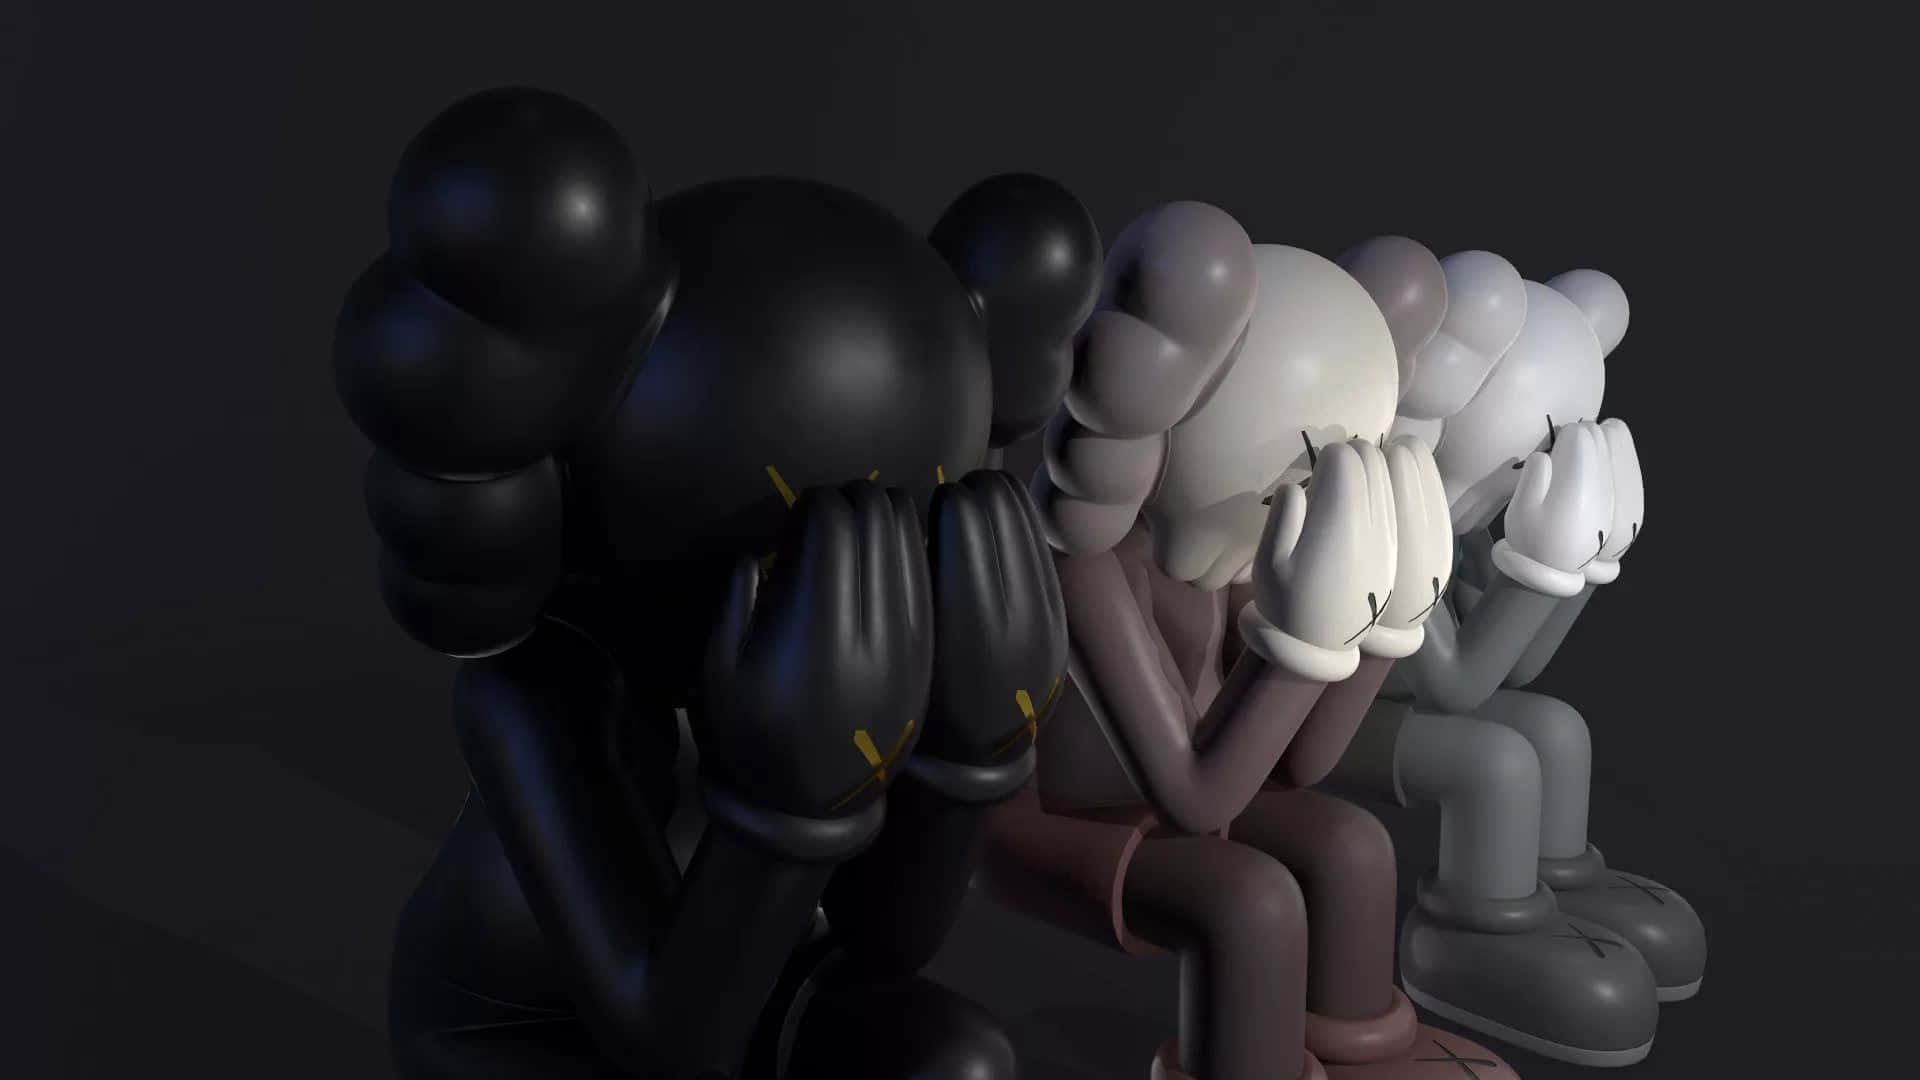 Brighten Up Your Home With A Cool Kaws Print! Wallpaper